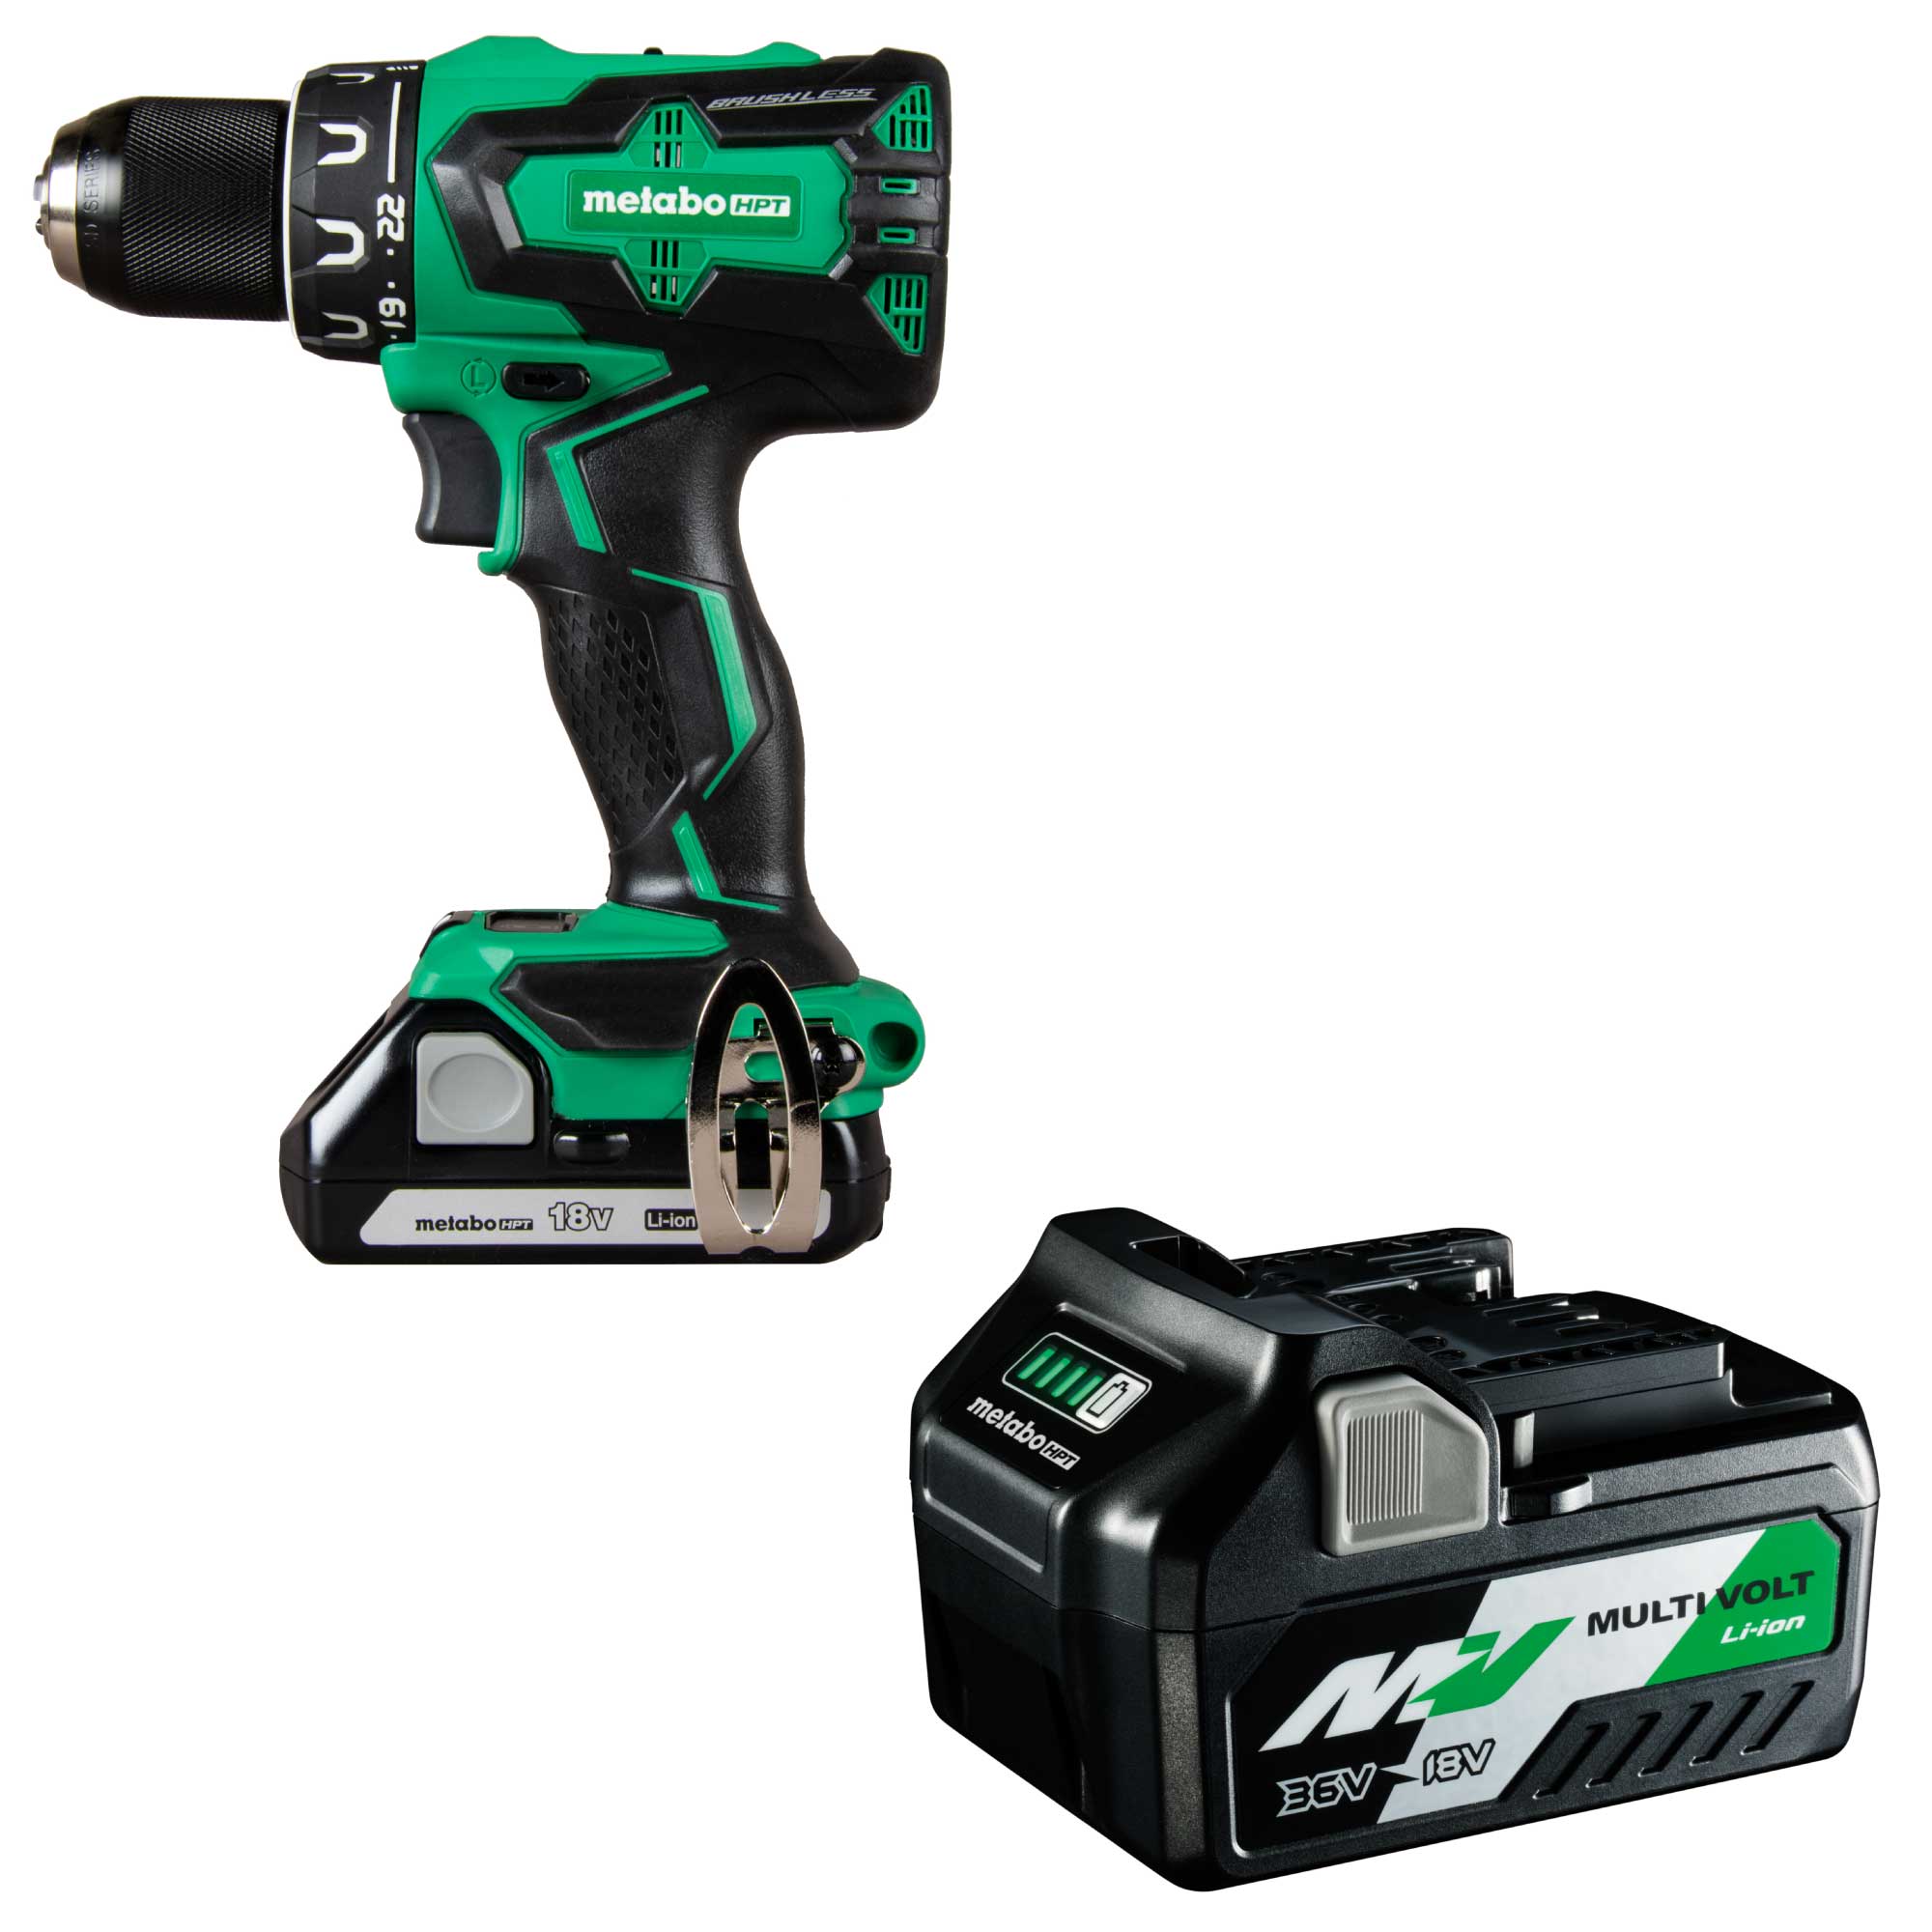 Metabo HPT MultiVolt 18-Volt 1/2-in Brushless Cordless Drill (2-batteries included and charger included) with MultiVolt 2.5Ah/5.0Ah Power Tool Battery